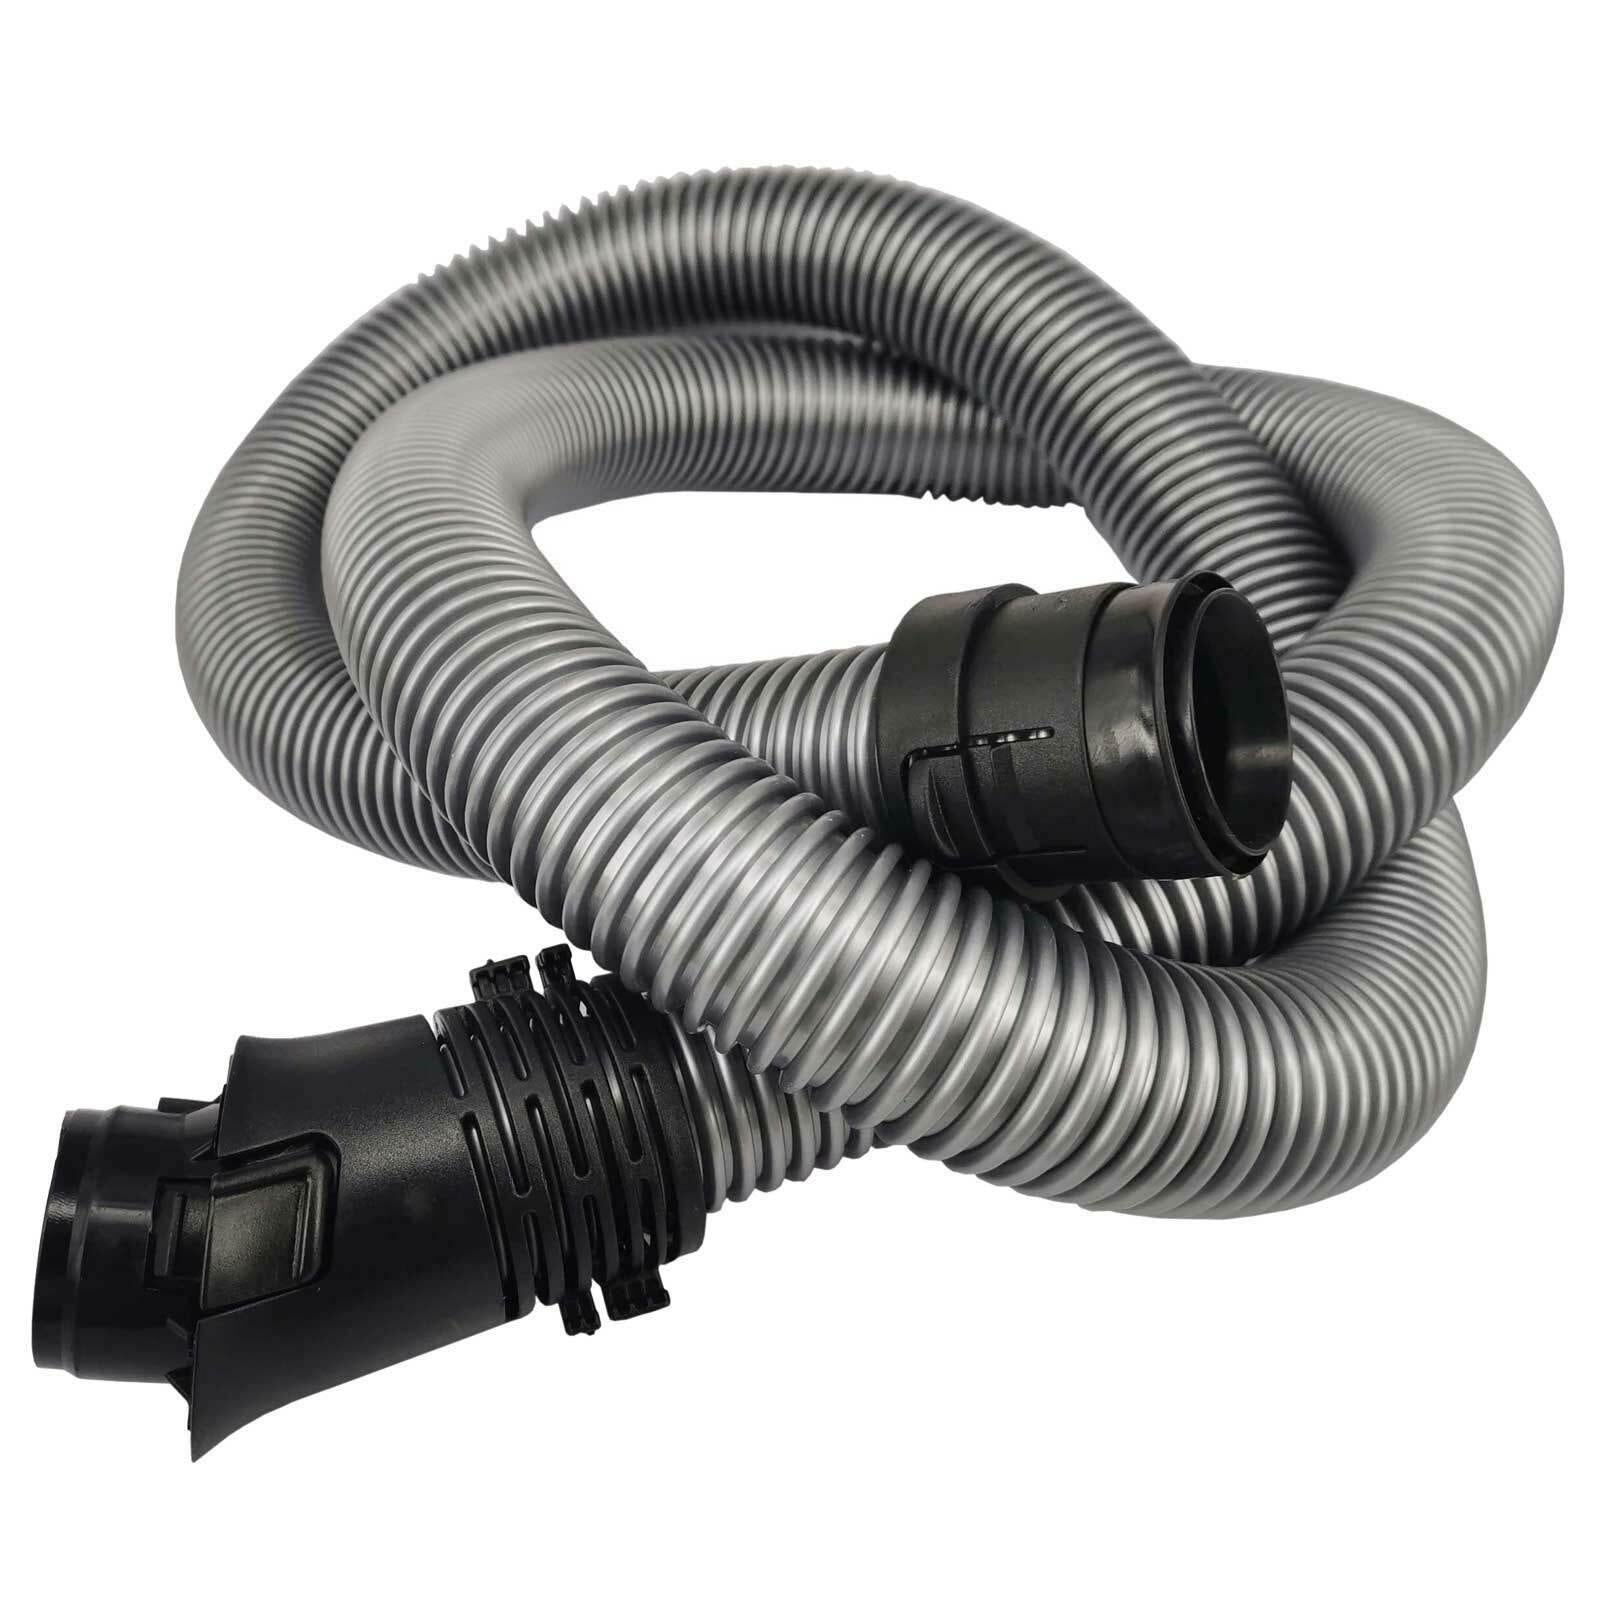 Suction Pipe Hose 1.8M For Miele Vacuum Cleaner S5261 S5211 S5000 S5281 SERIES Sparesbarn